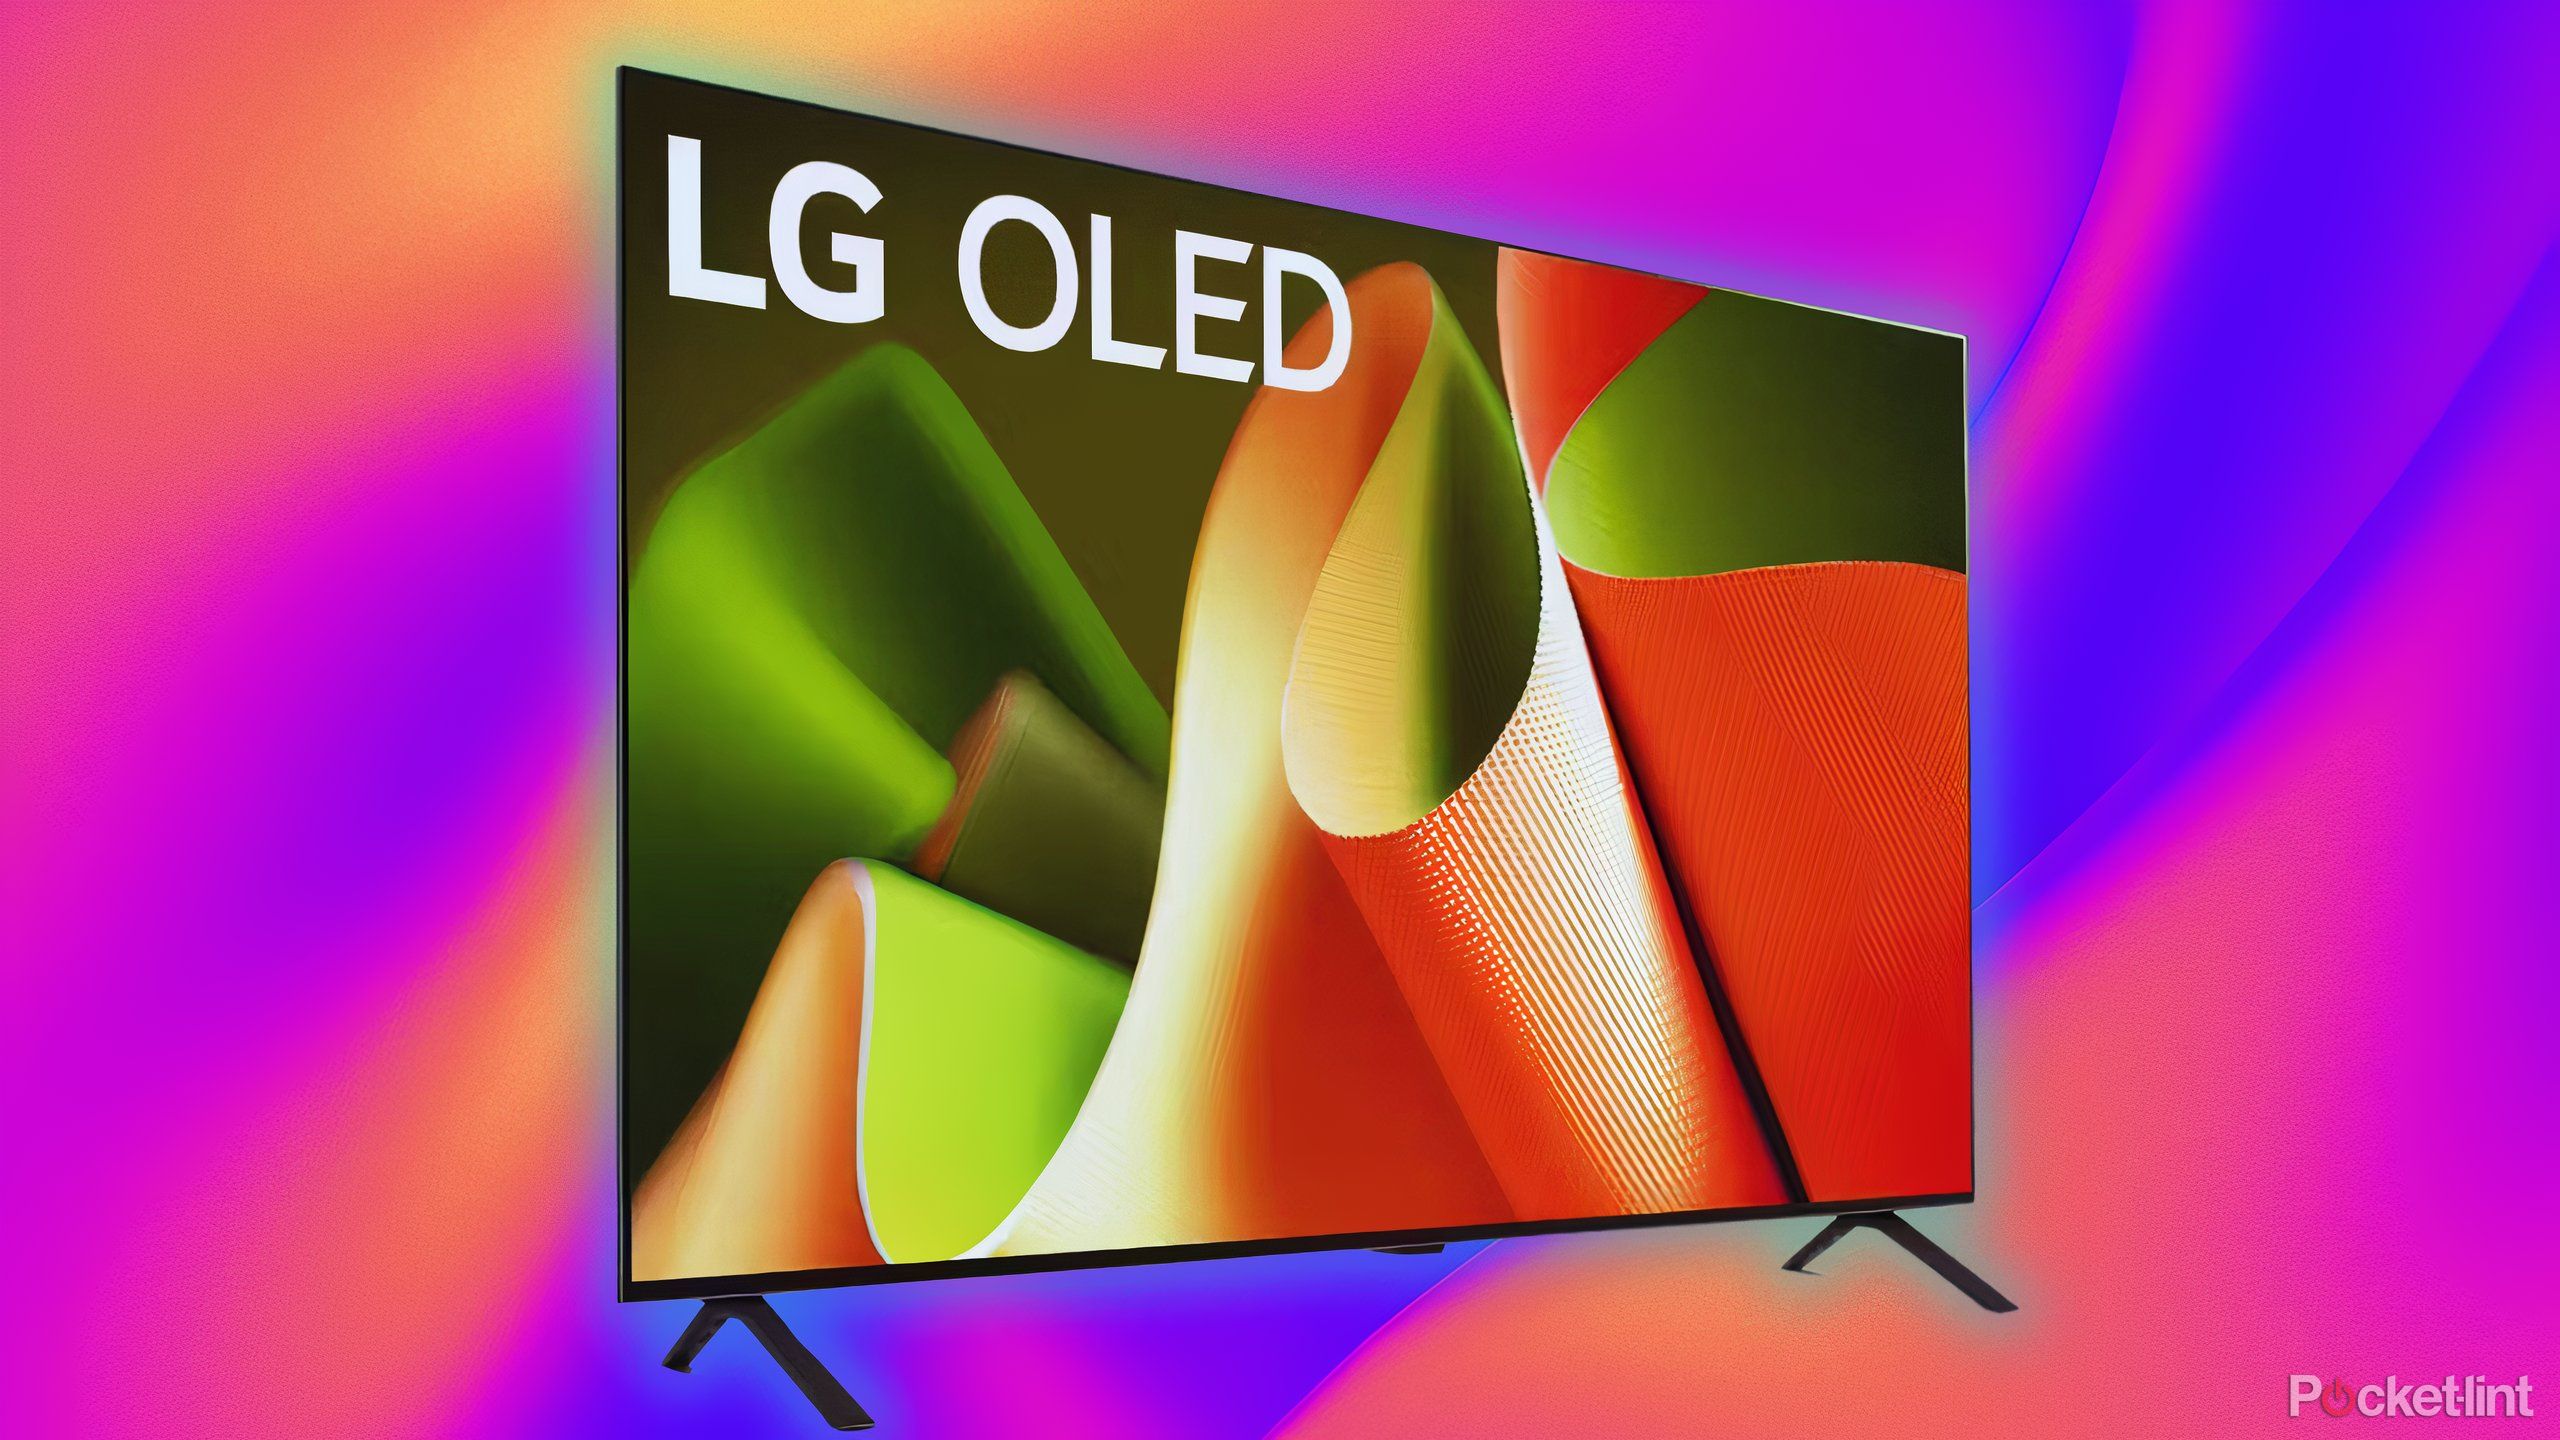 5 things to know about LG’s new 4K TV lineup